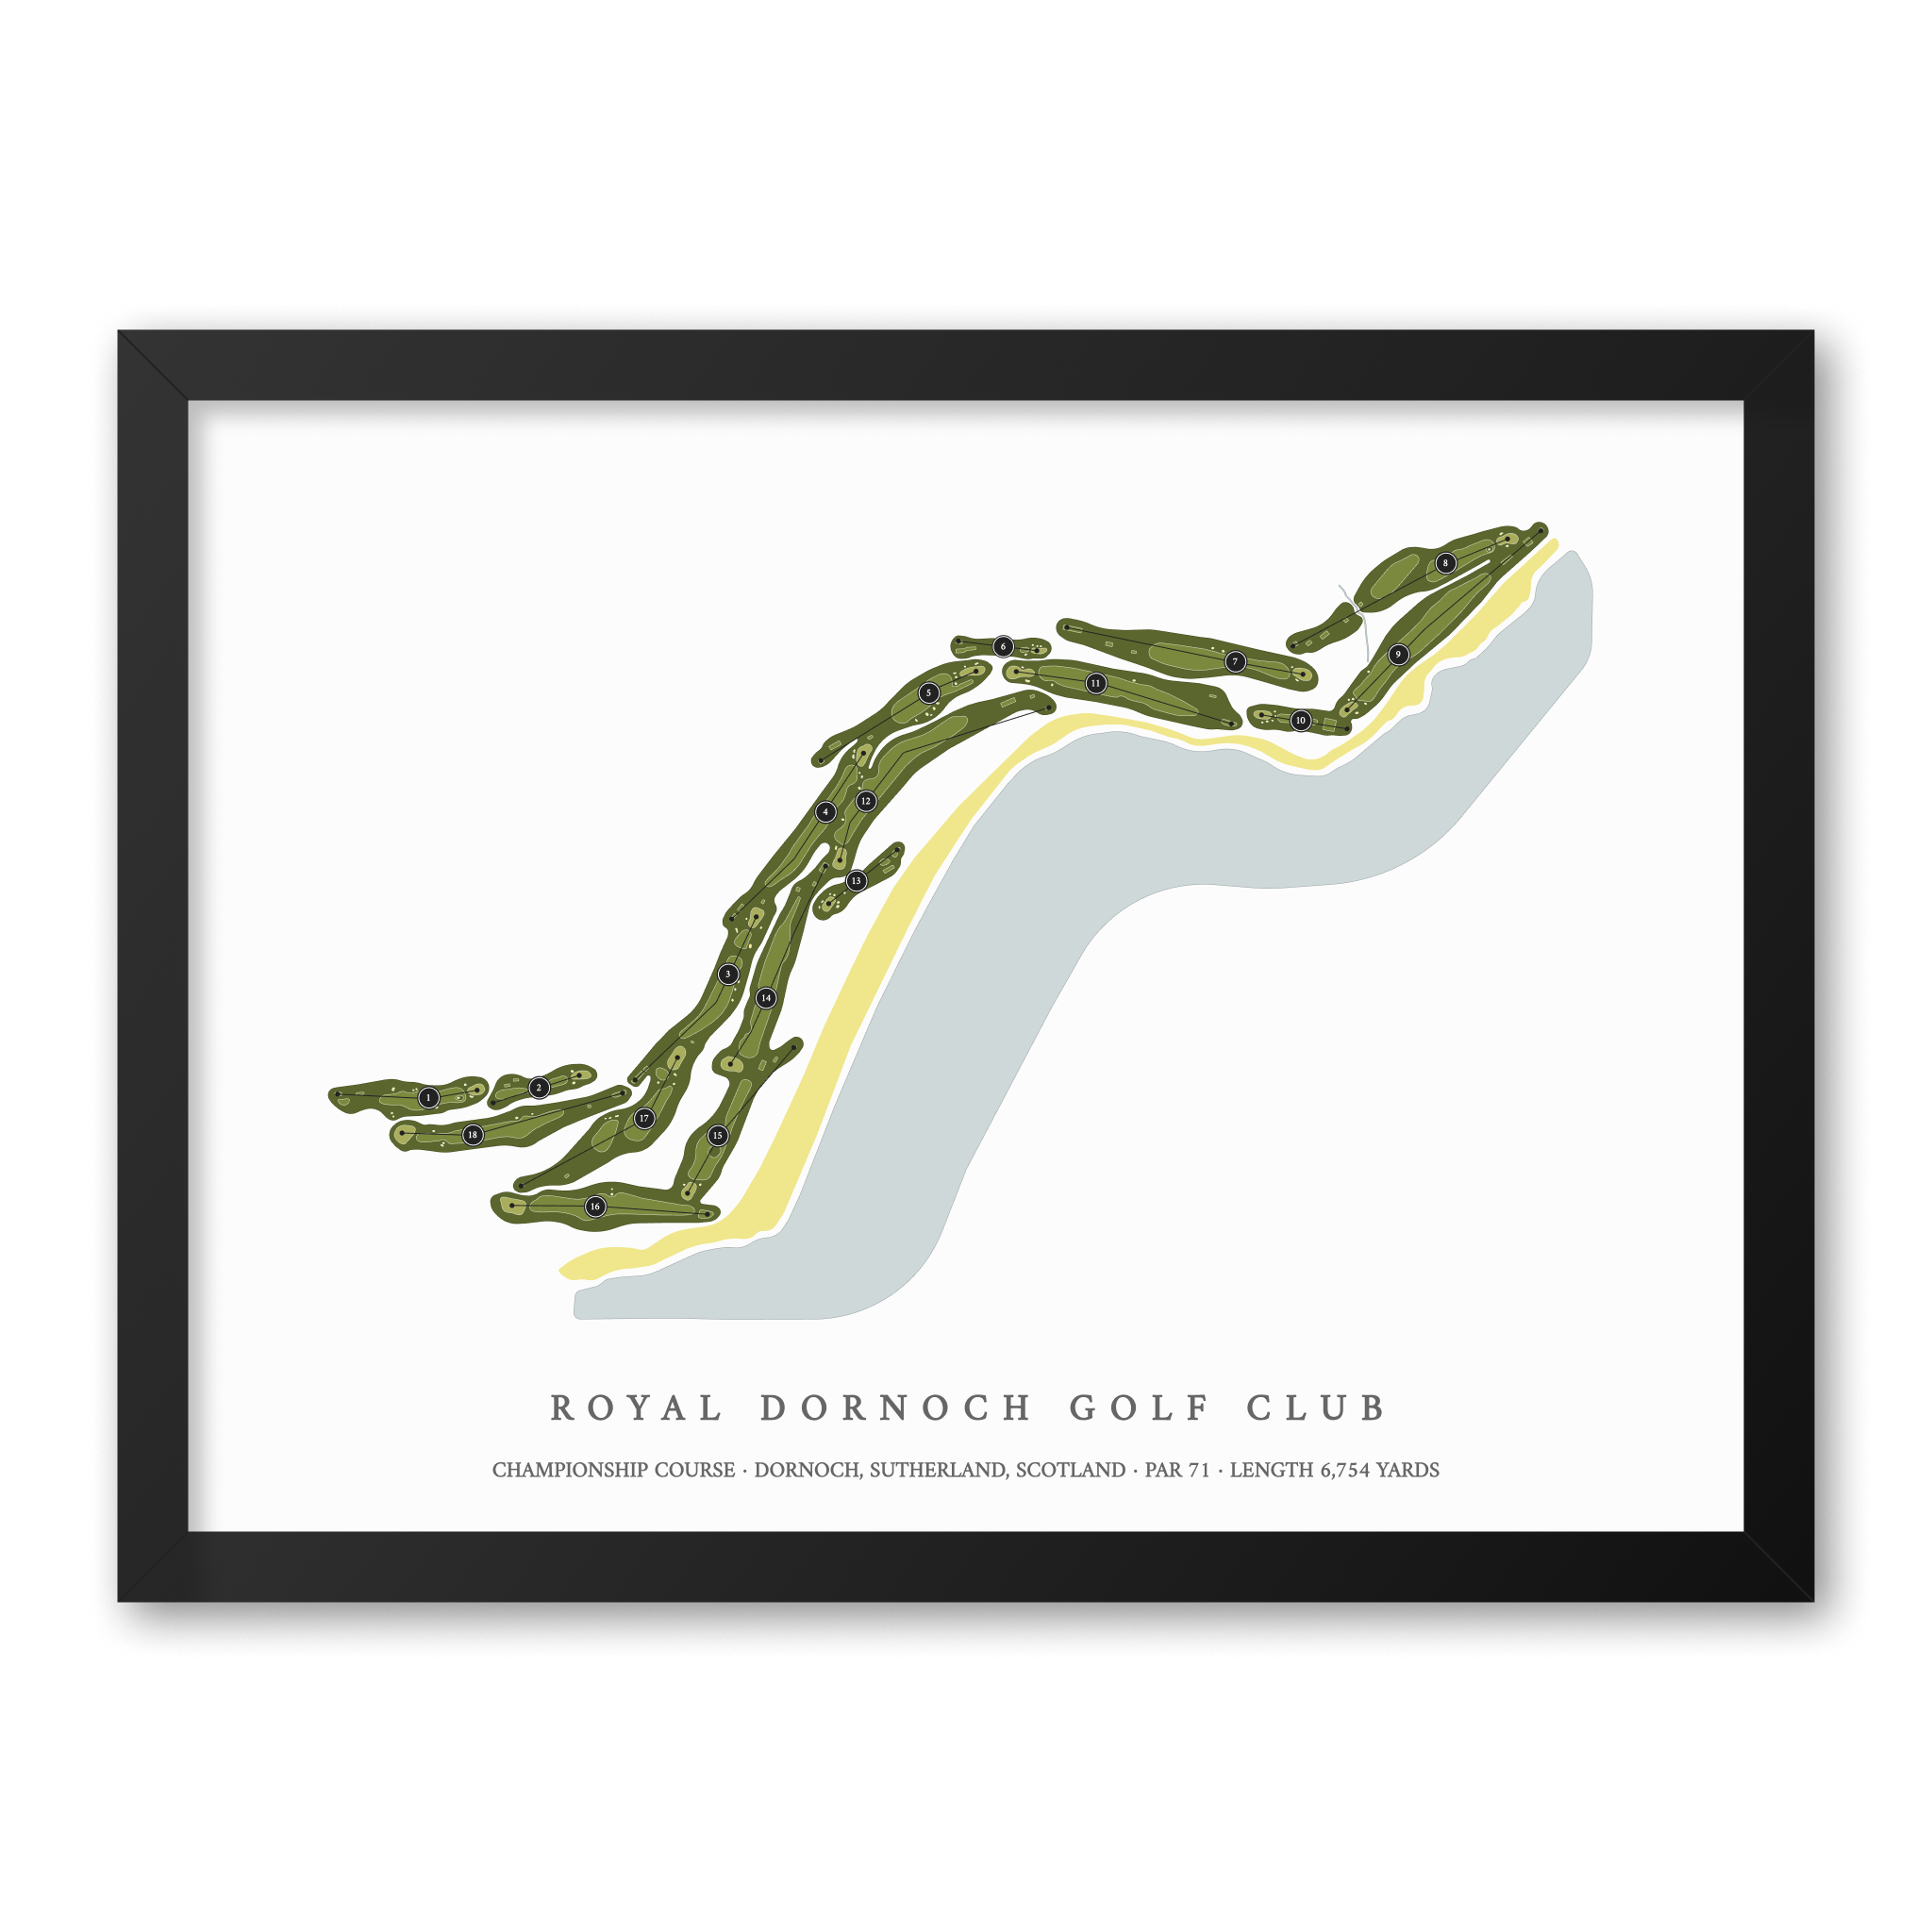 Royal Dornoch Golf Club - Championship Course | Golf Course Map | Black Frame With Hole Numbers #hole numbers_yes